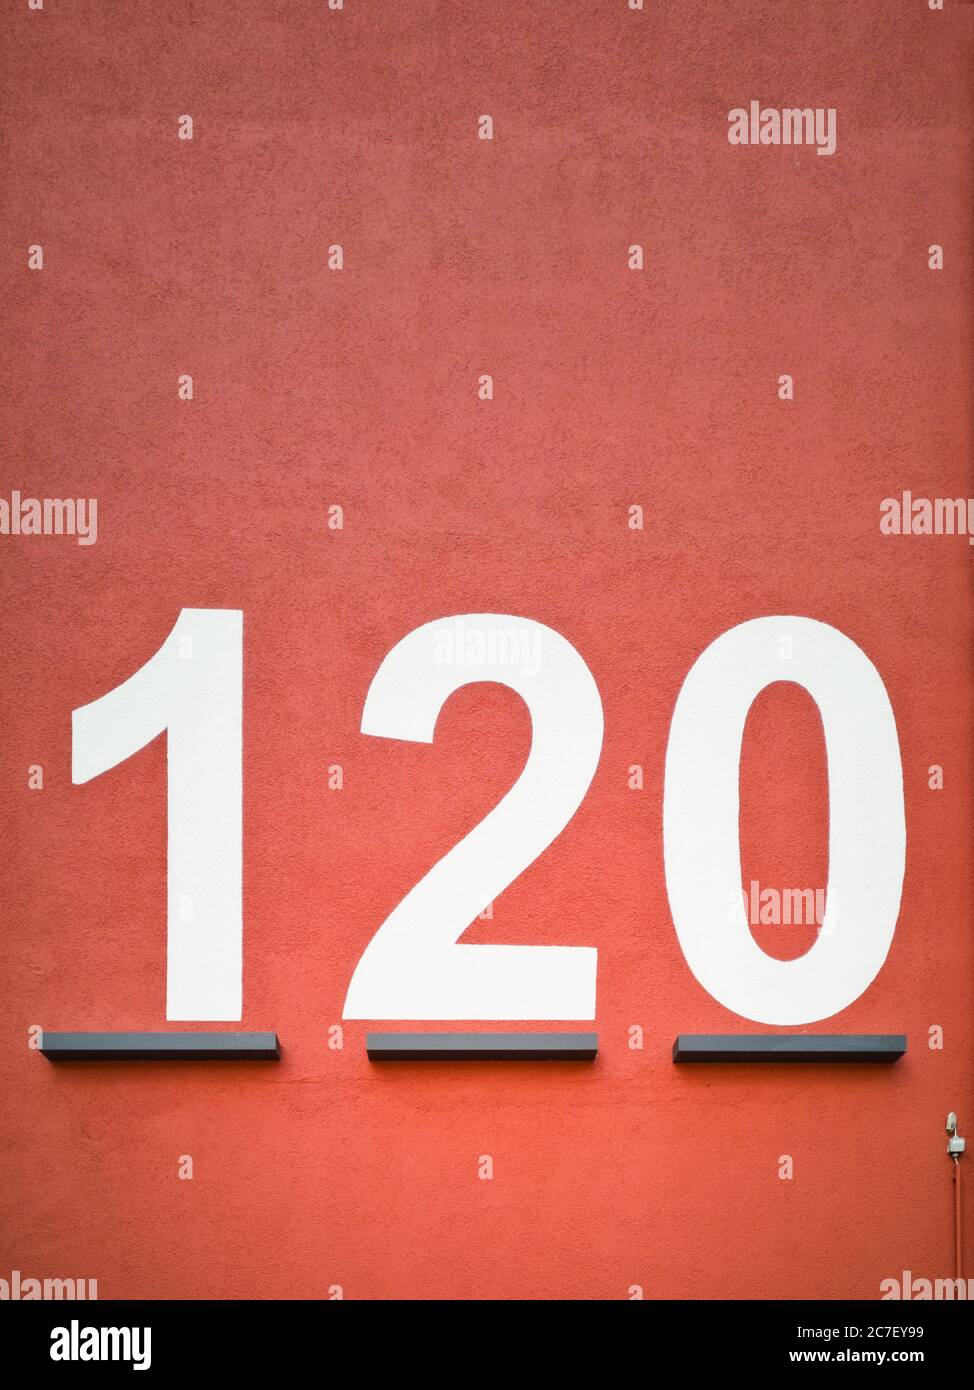 Vertical shot of a red surface with the number 120 printed  on it Stock Photo